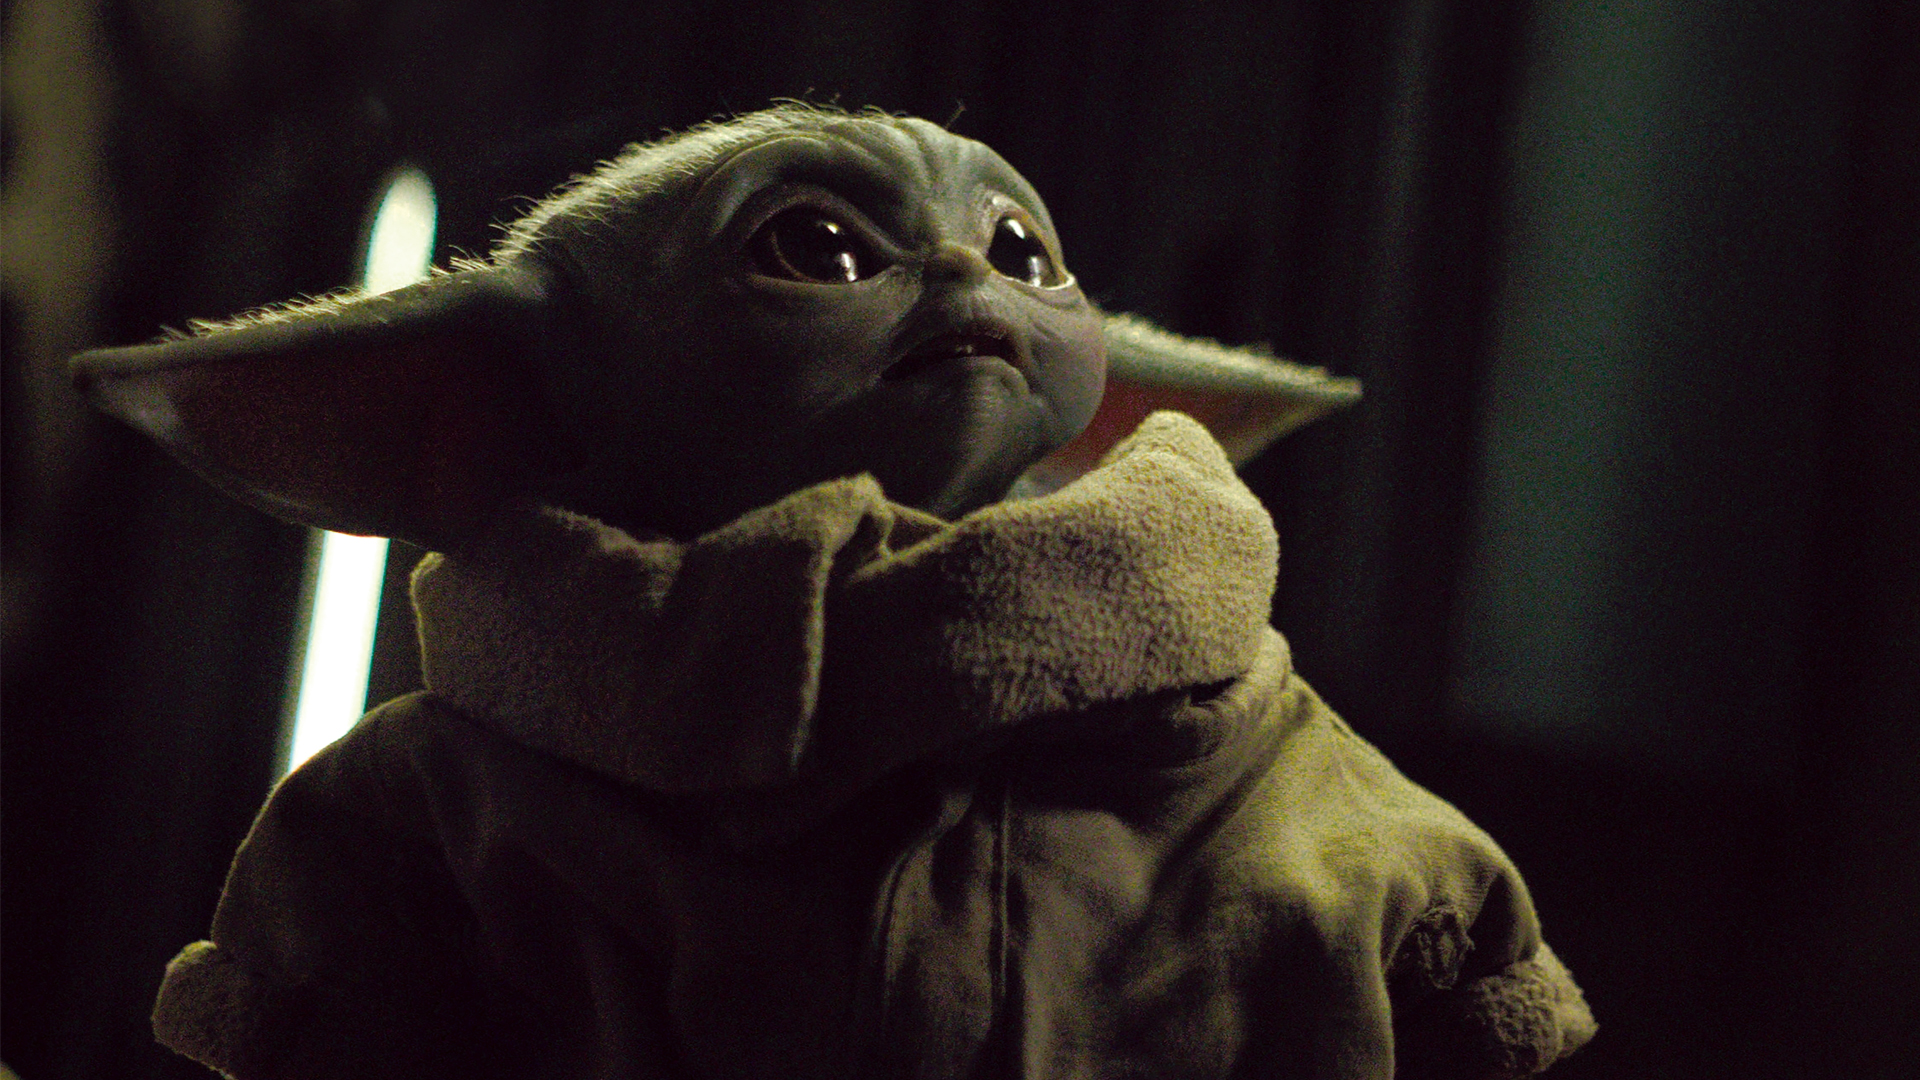 Baby Yoda: 10 lockdown lessons from the cute Mandalorian star